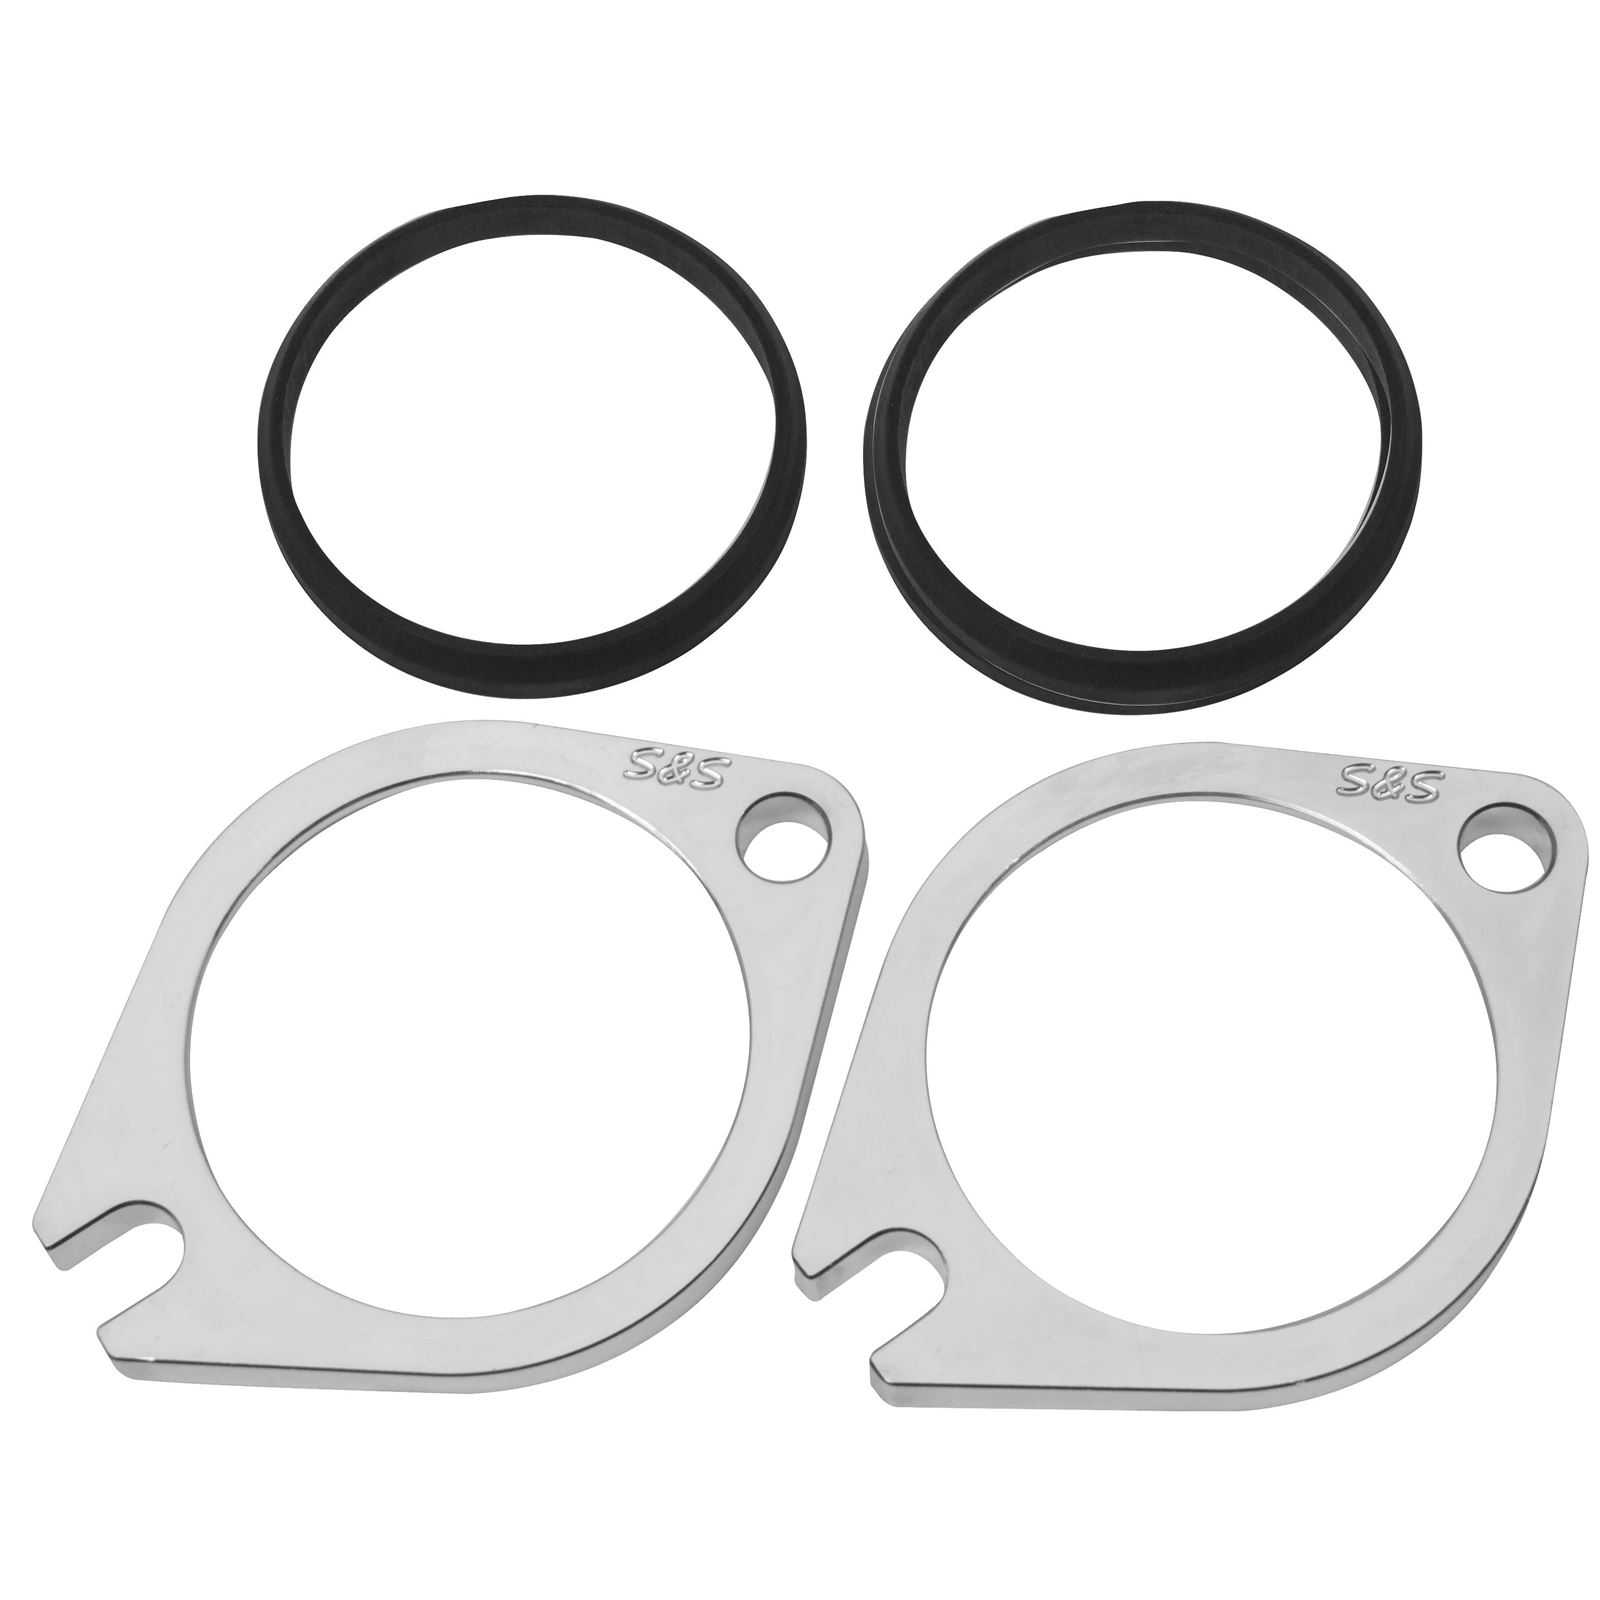 S&S Cycle Stealth Air Cleaner Kit Intake Flange Set 06-17 Big Twin